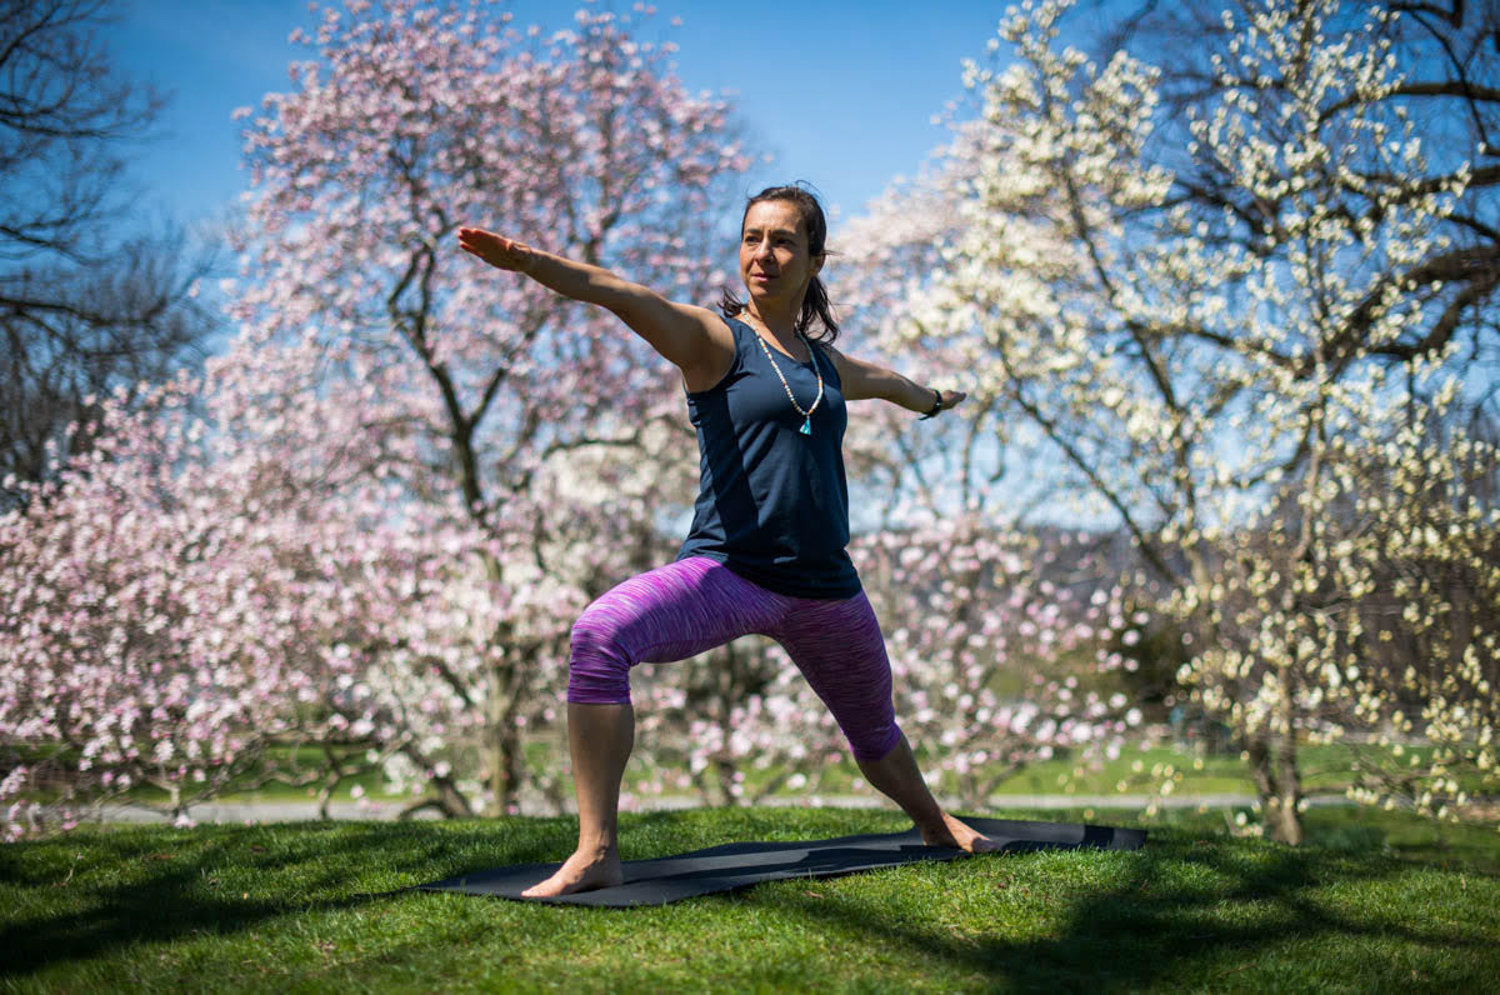 In a time before the coronavirus pandemic, Susie Caramanica would teach yoga on the grounds at Wave Hill. Now, she’s taken her practice online.